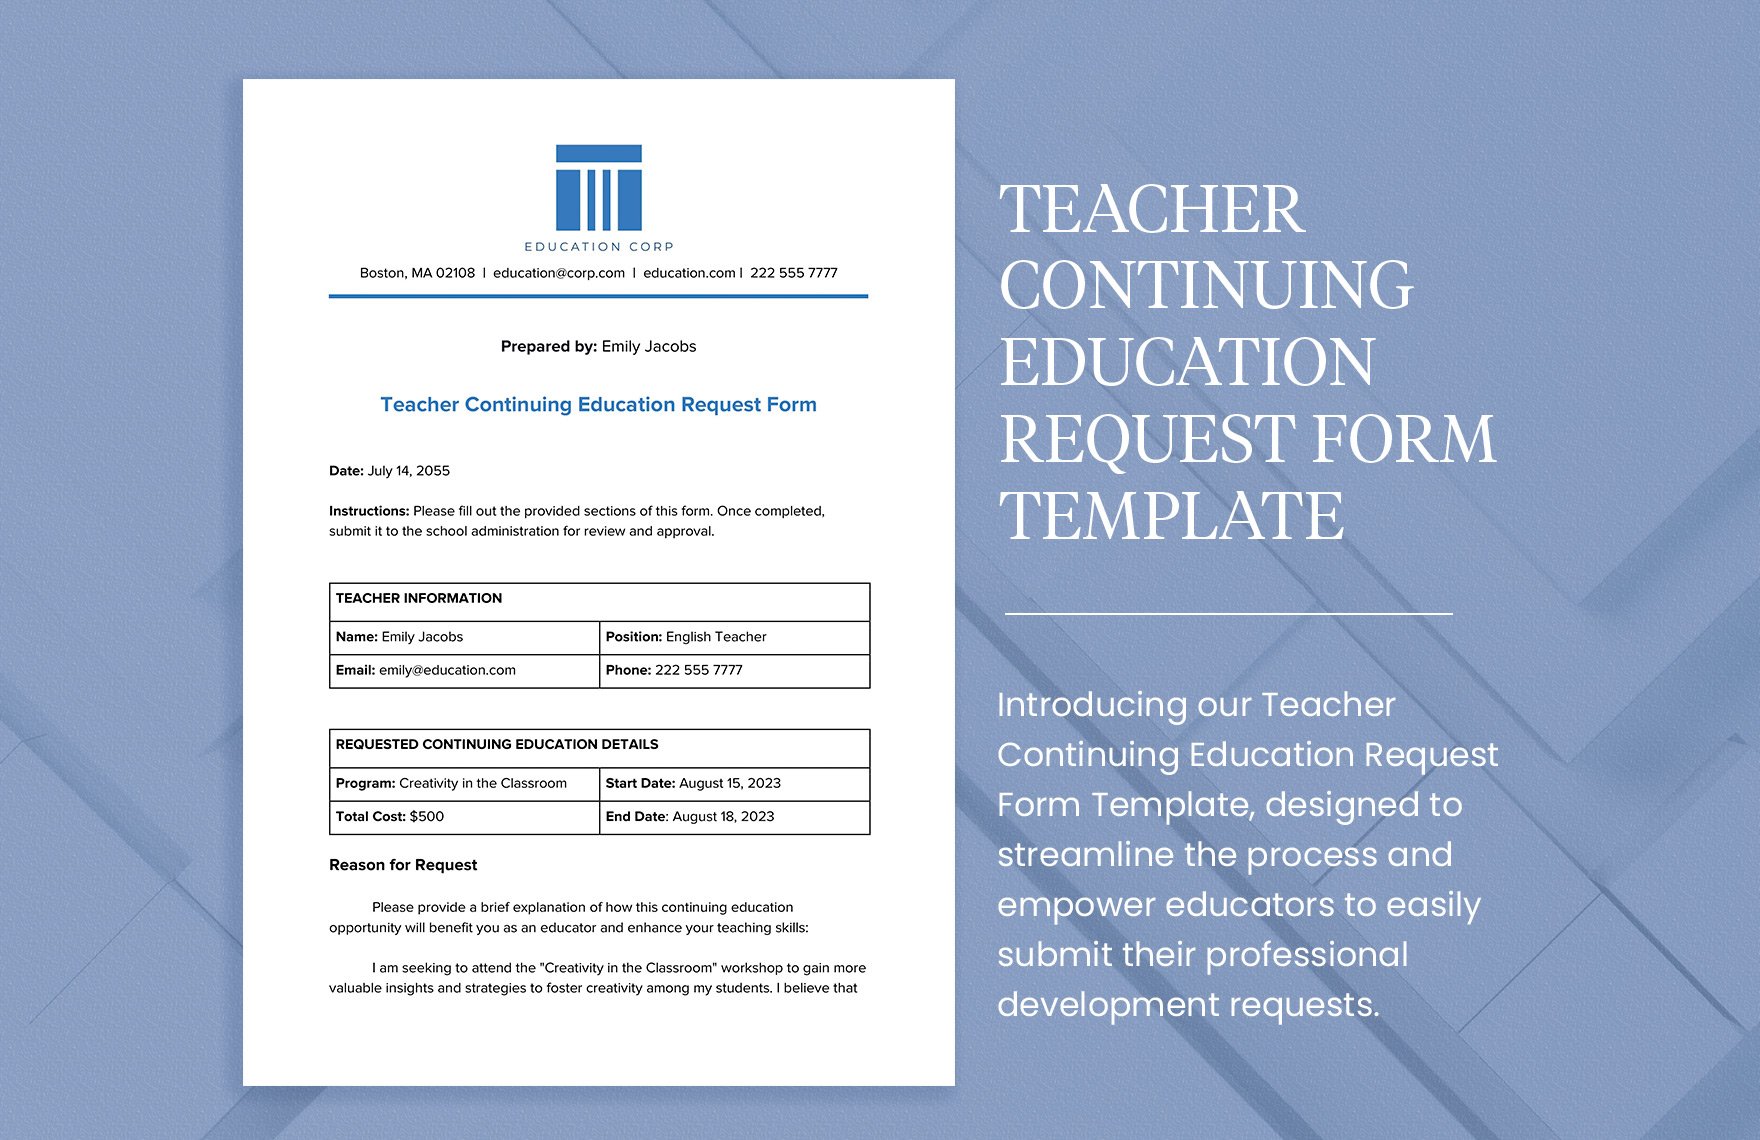 Teacher Continuing Education Request Form Template